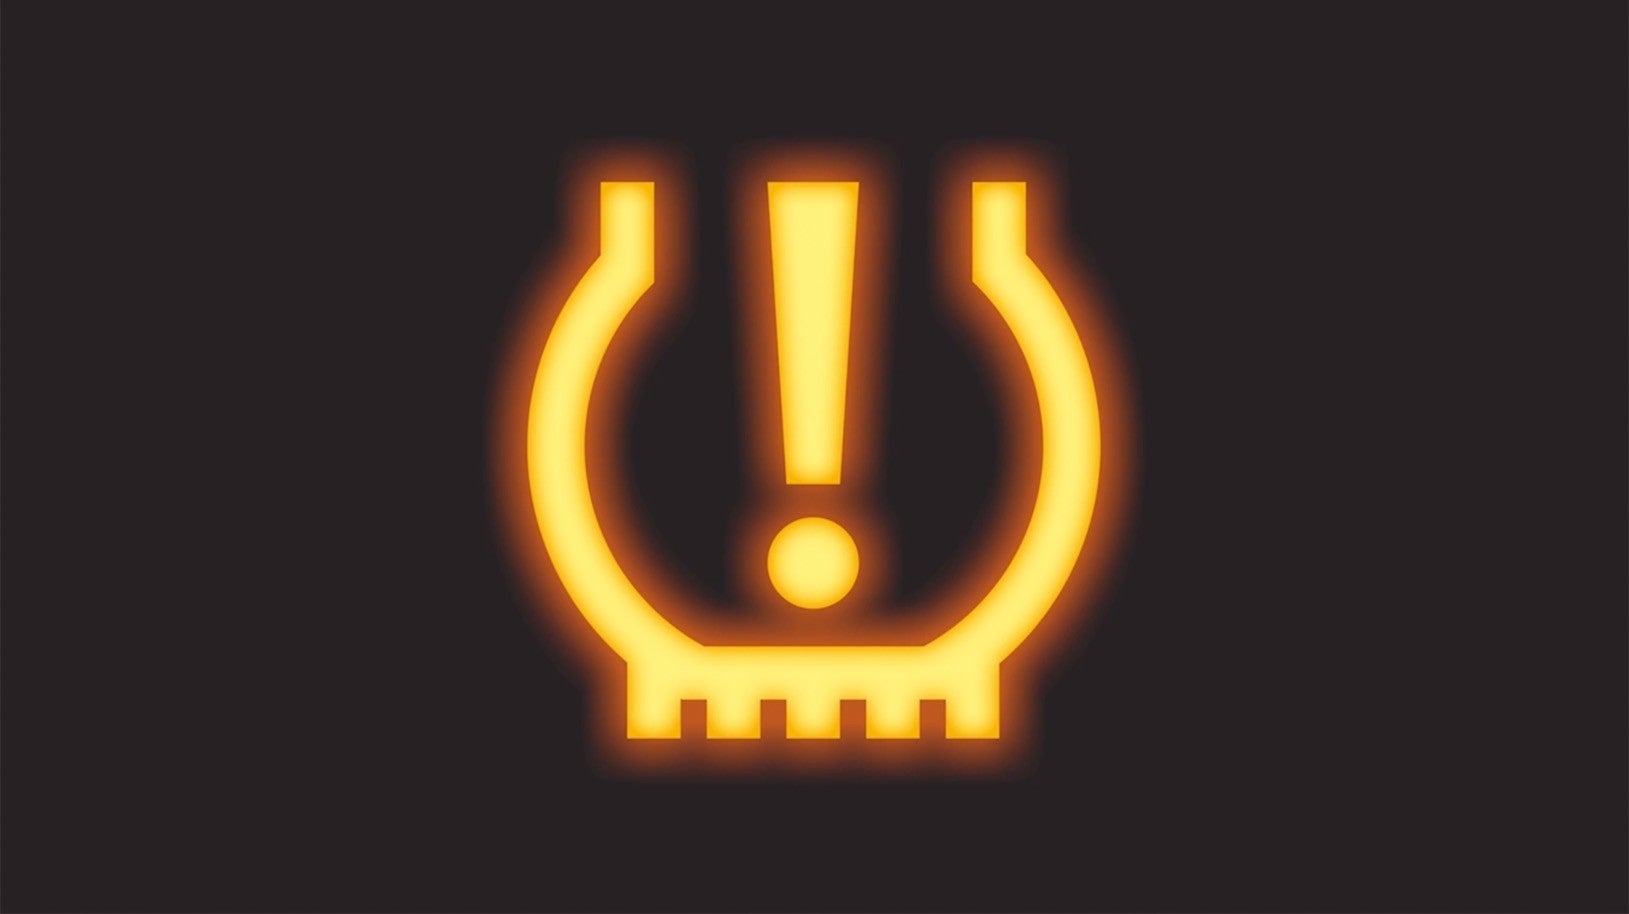  Image of the Tire Pressure Monitoring System Light | Sunset Hills Subaru in Sunset Hills MO